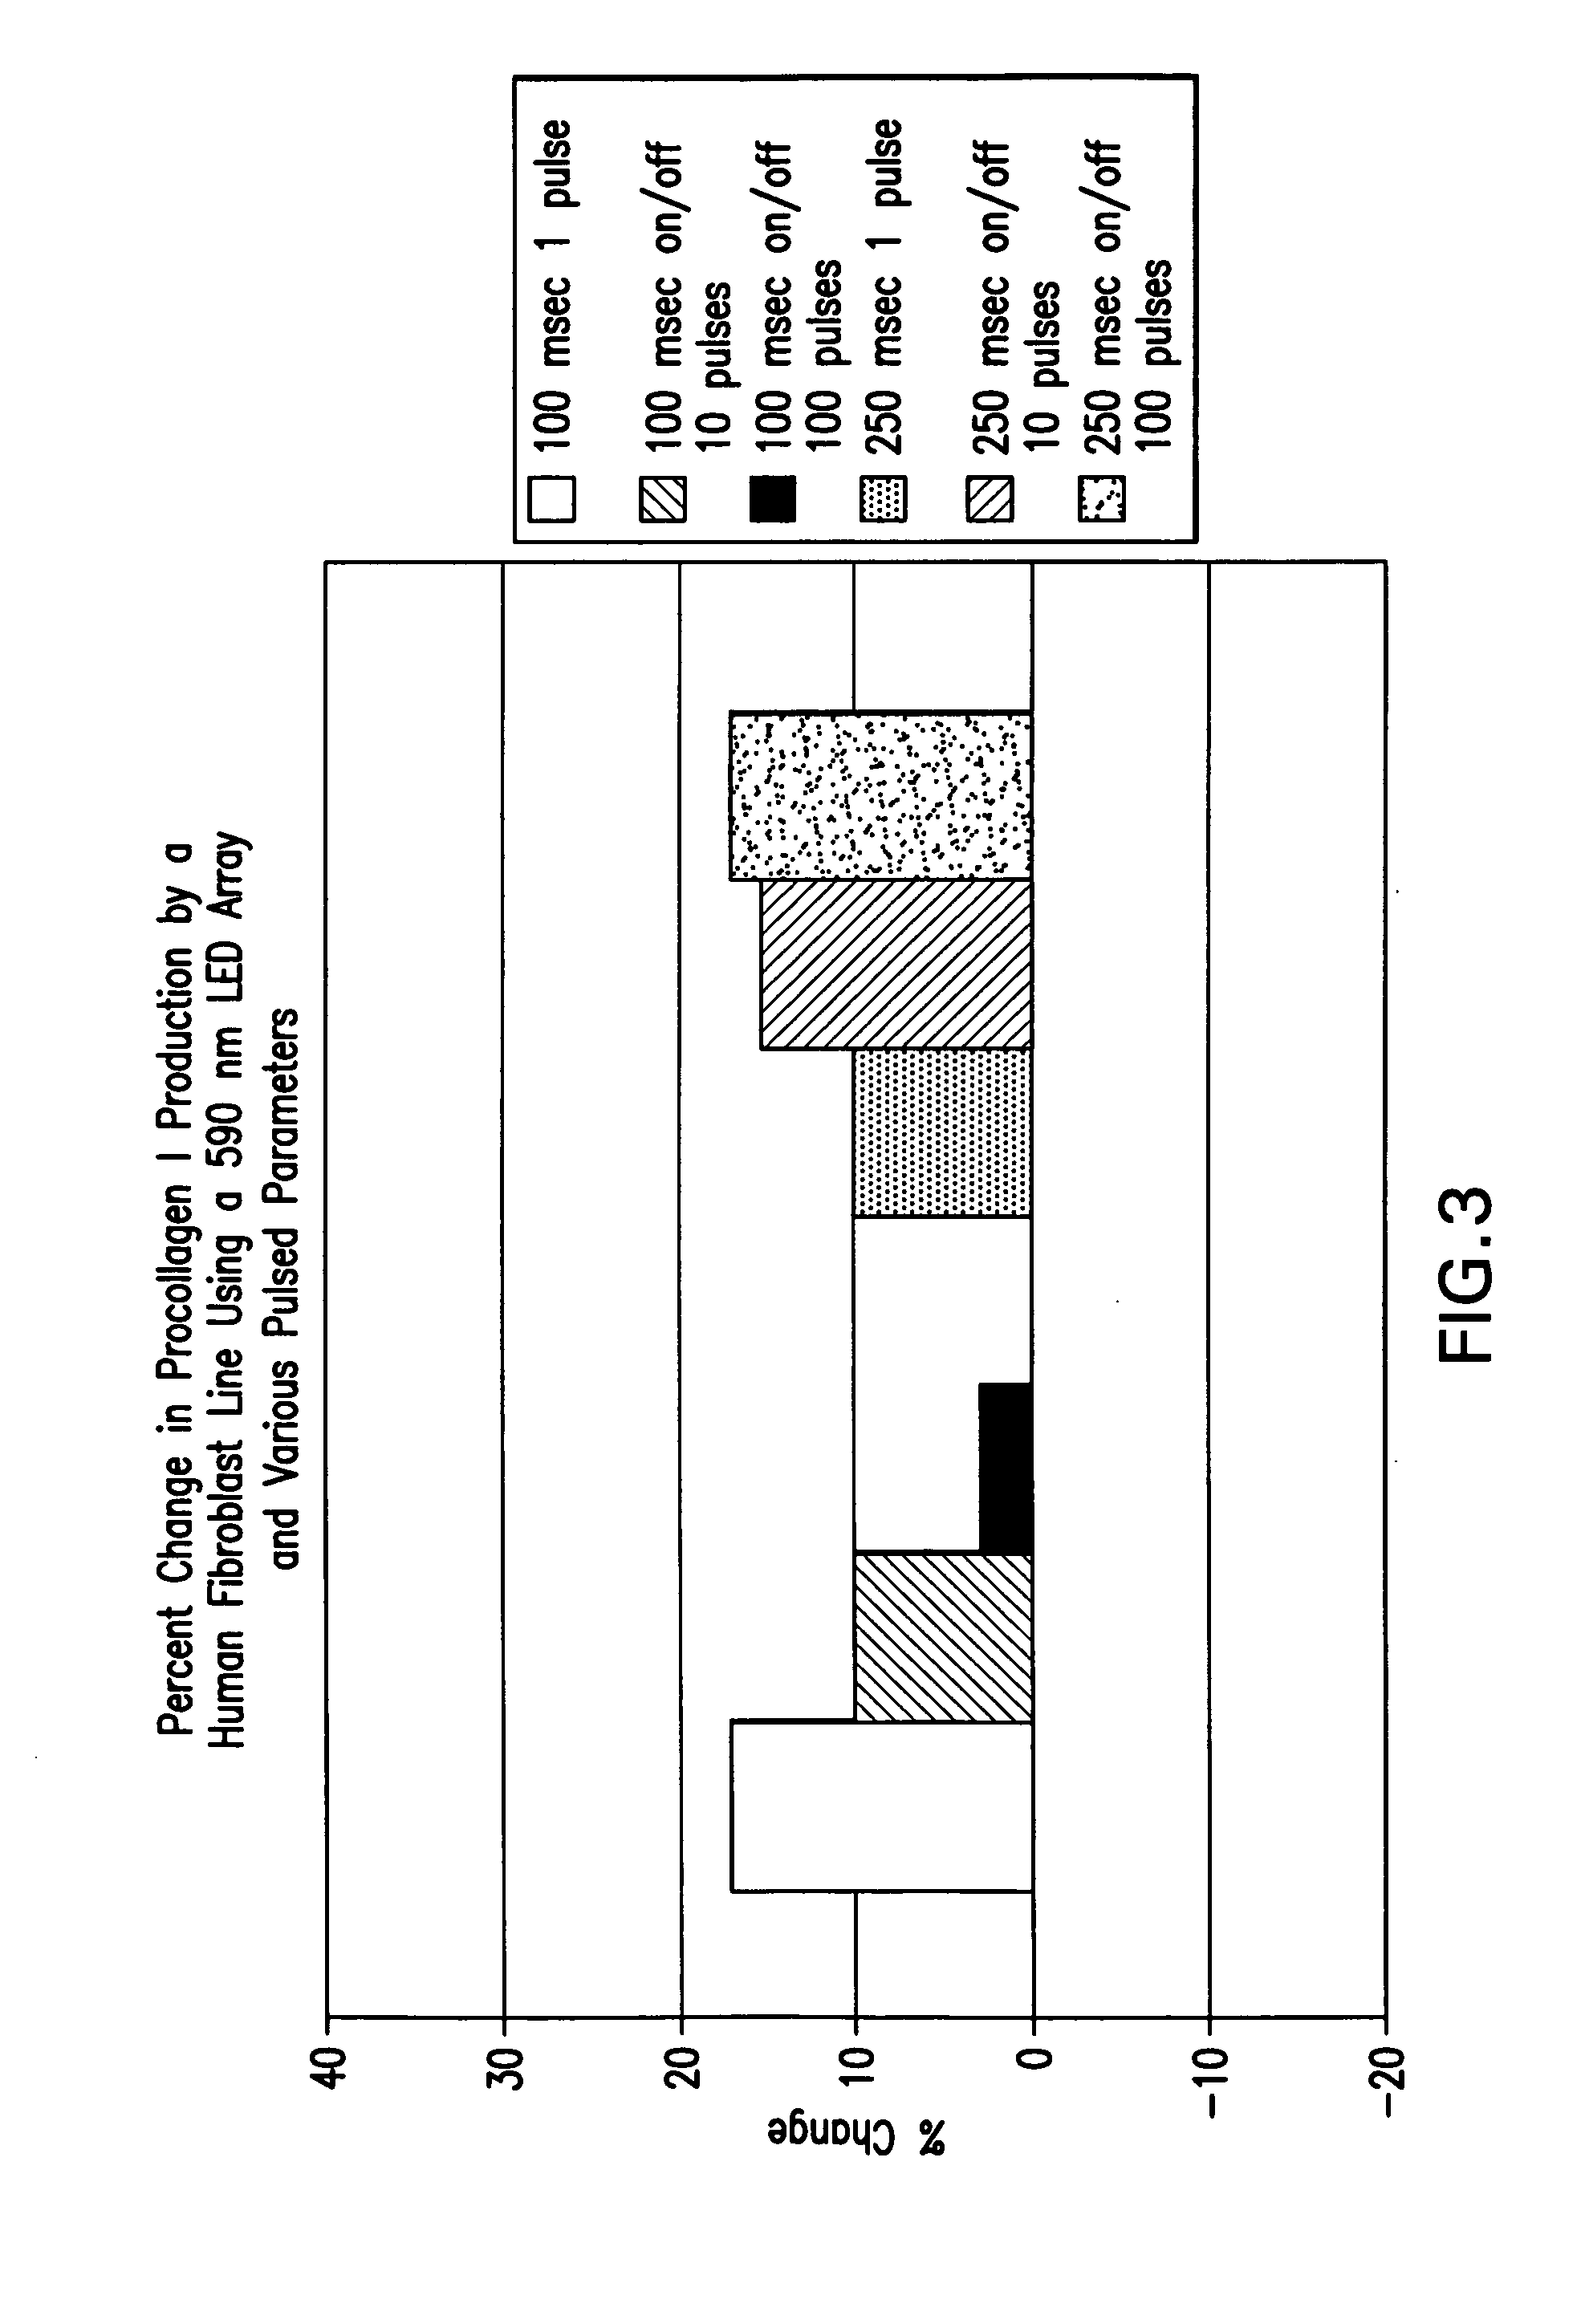 Photomodulation methods and devices for regulating cell proliferation and gene expression